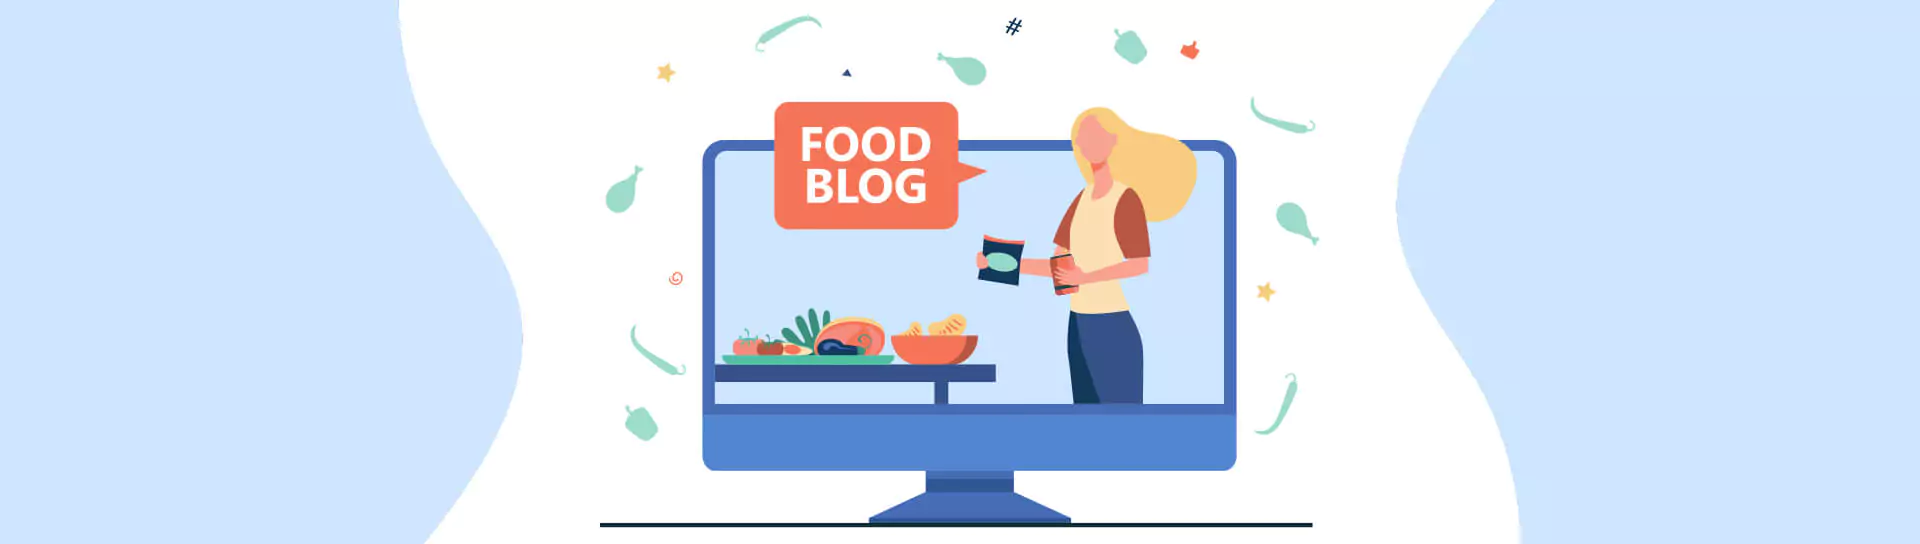 SEO for Food Blogs - Top Easy Ways to Optimize Your Food Blog